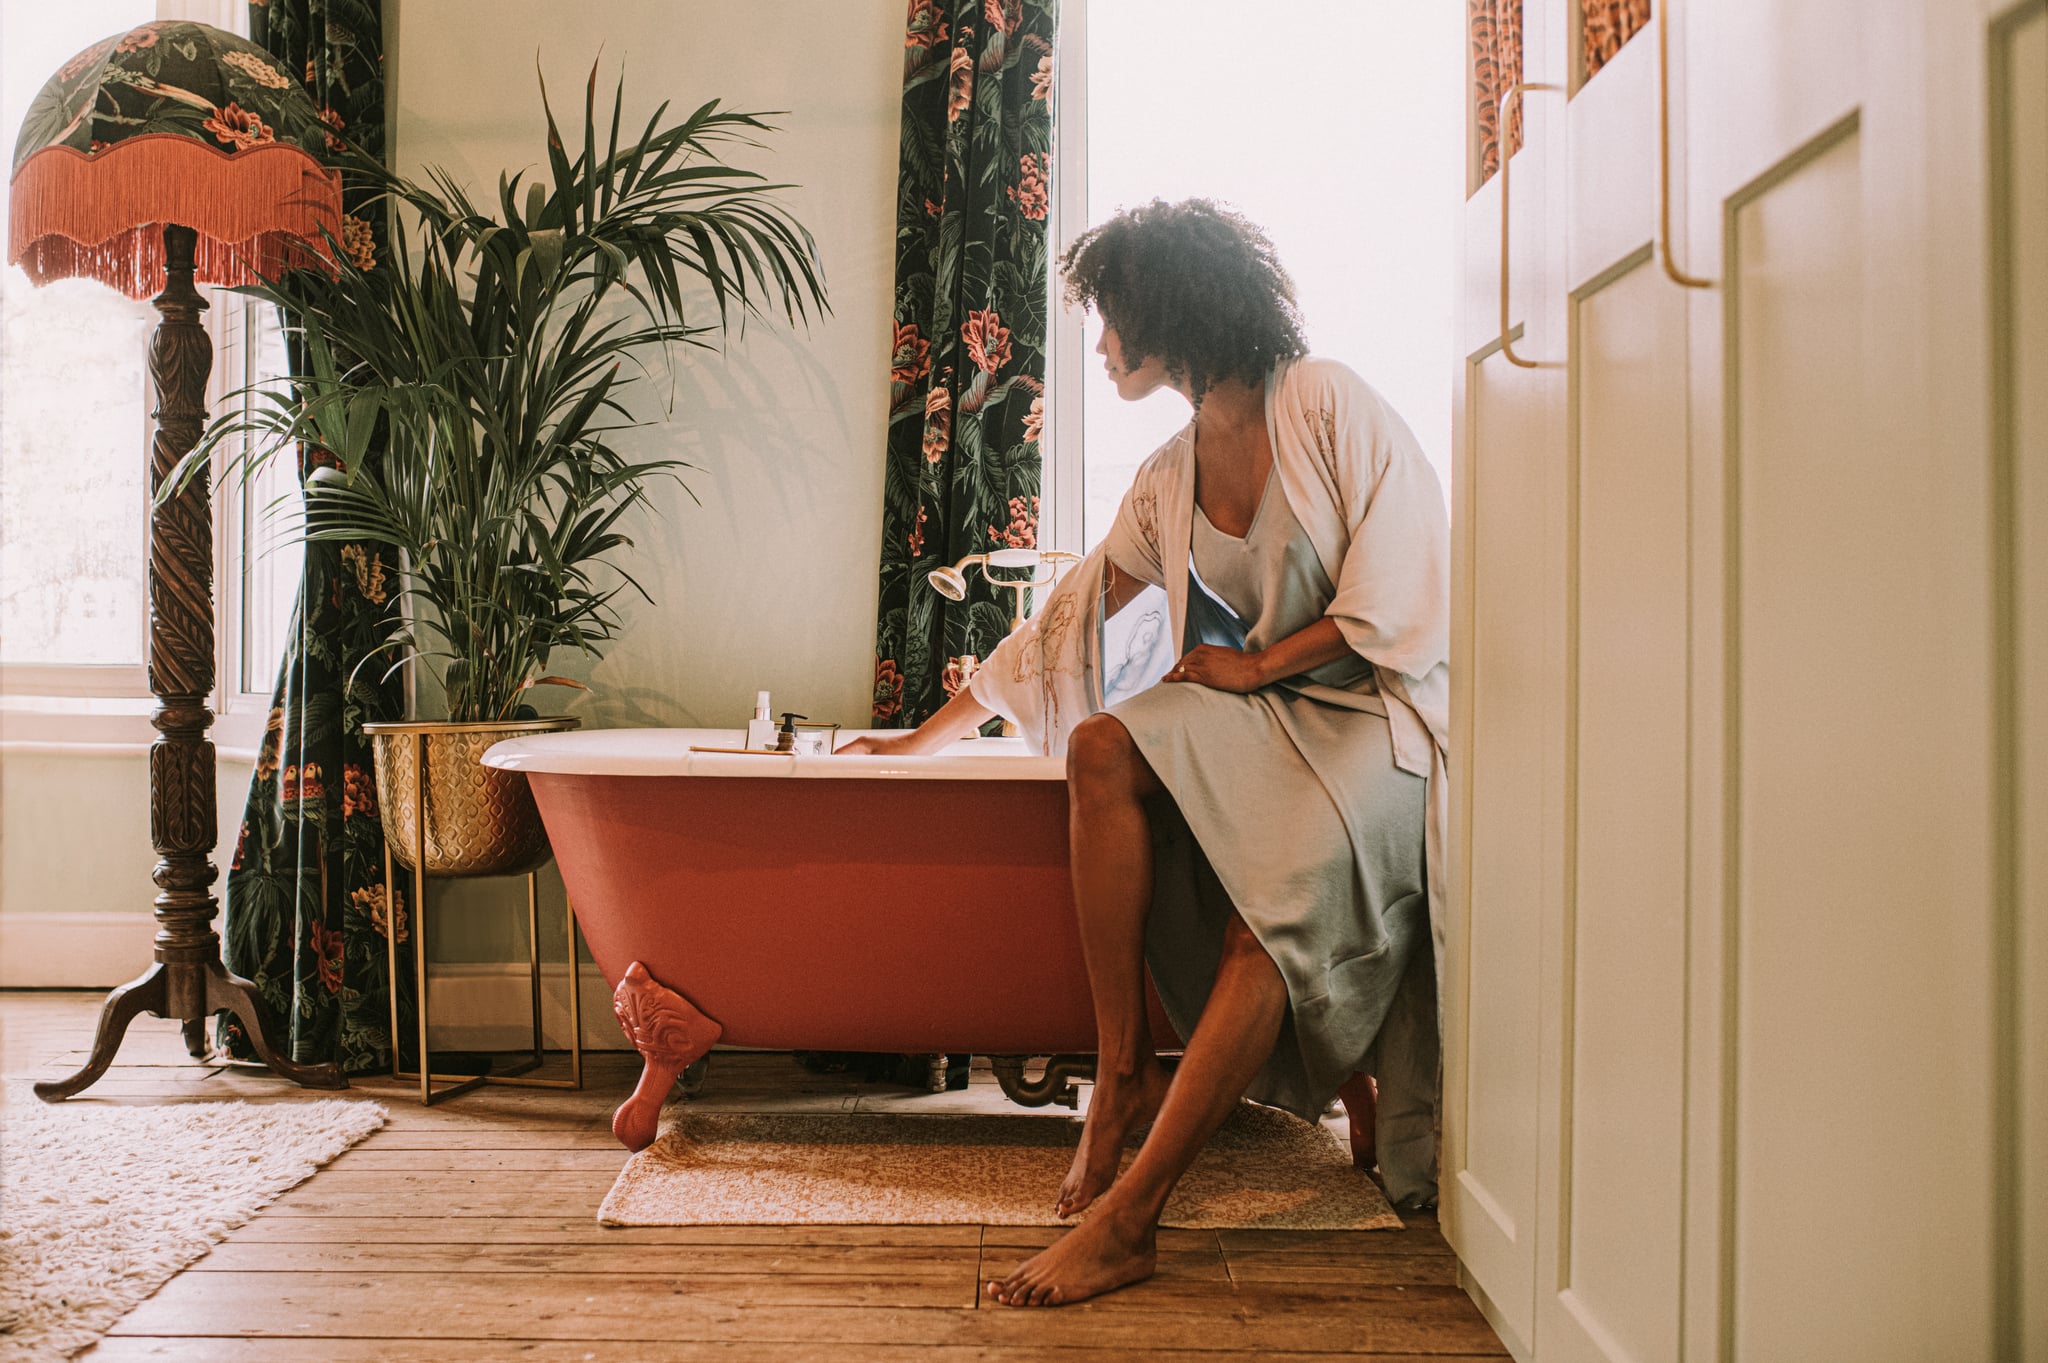 A beautiful woman perches on the side of an elegant red roll top bathtub, and waits for it to fill up. She wears a silky robe. Light floods through the window, backlighting the relaxing scene and giving it a dreamy vibe.